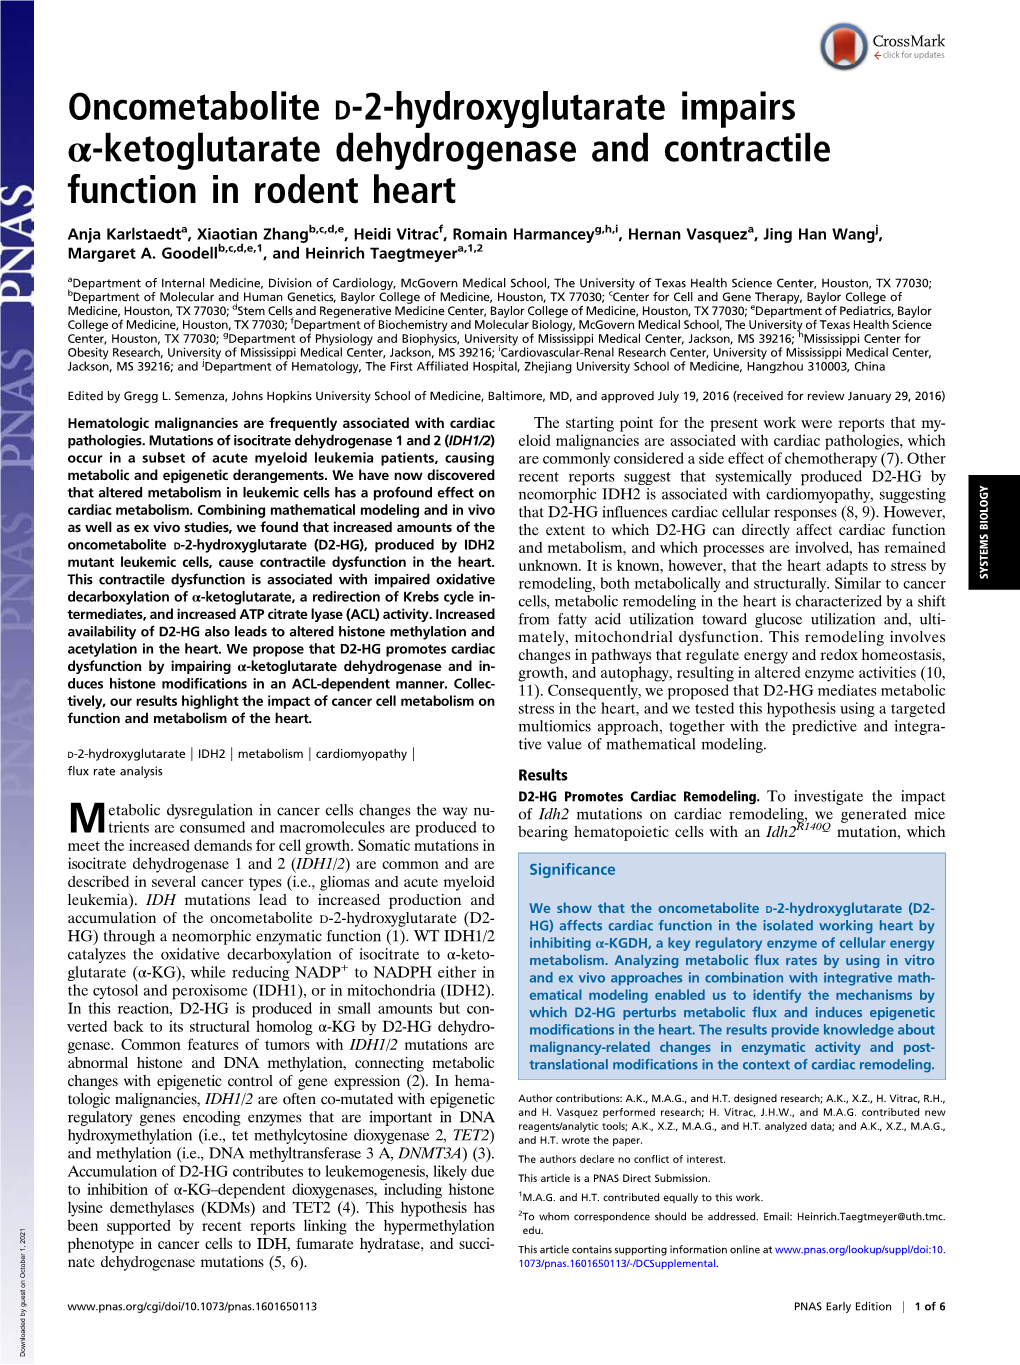 Oncometabolite D-2-Hydroxyglutarate Impairs Α-Ketoglutarate Dehydrogenase and Contractile Function in Rodent Heart